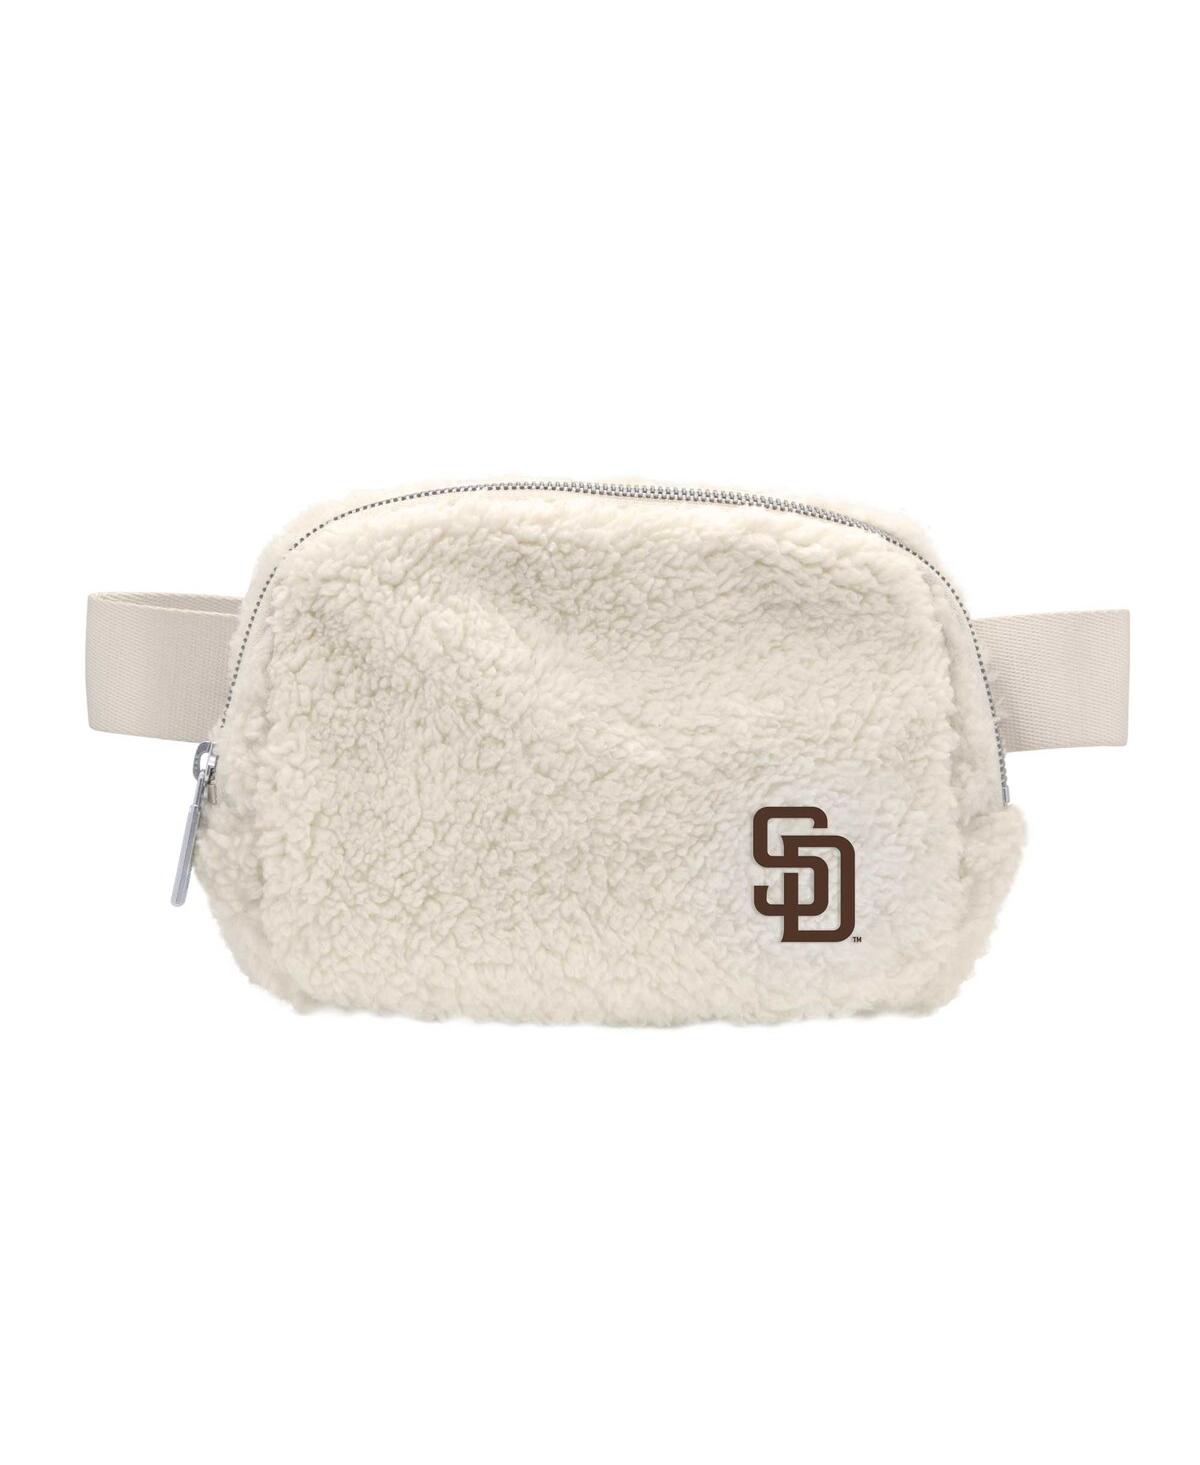 Women's San Diego Padres Sherpa Fanny Pack - White